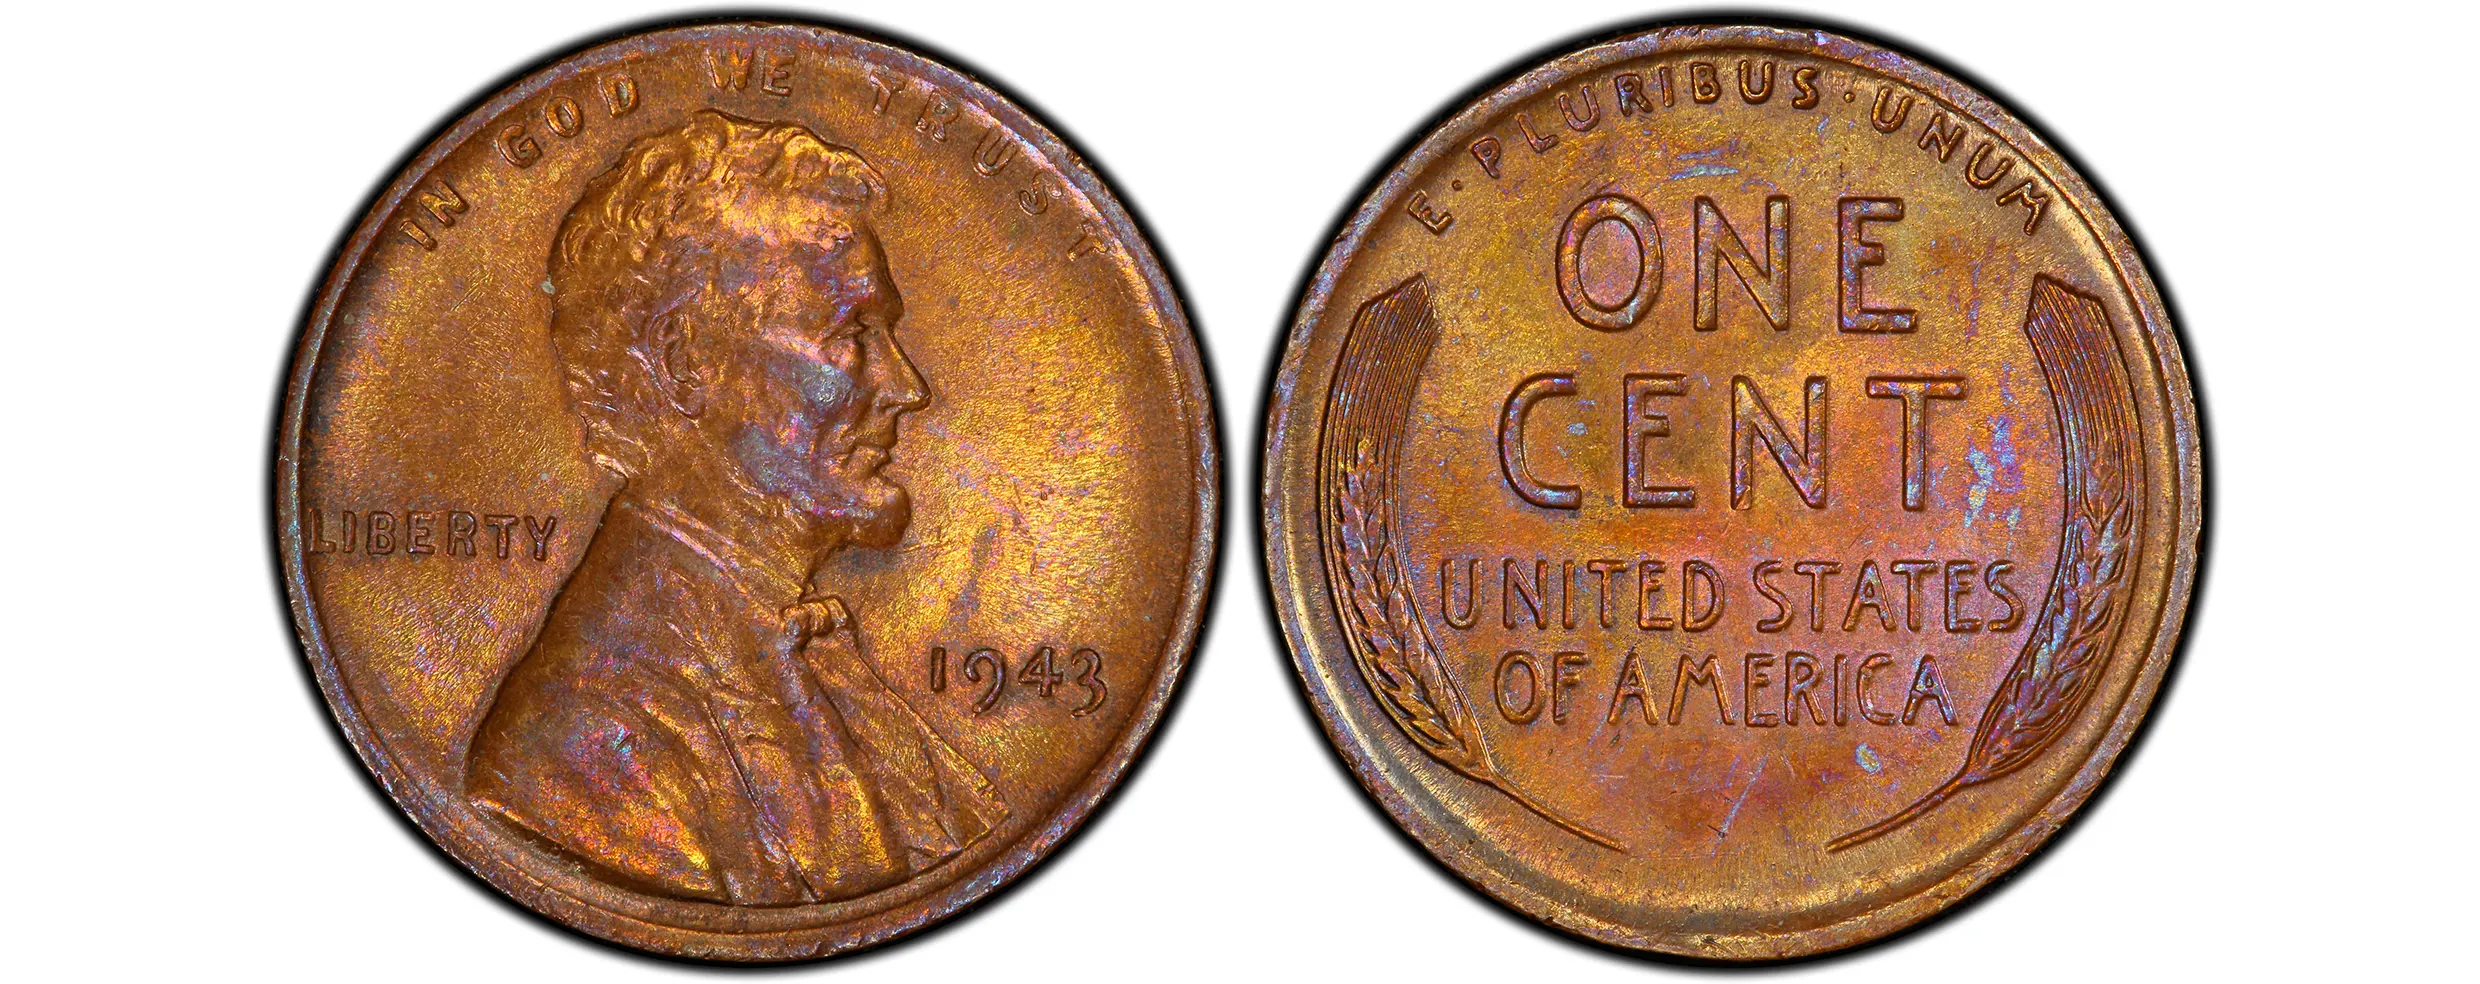 1943 Lincoln Penny (Bronze Alloy)